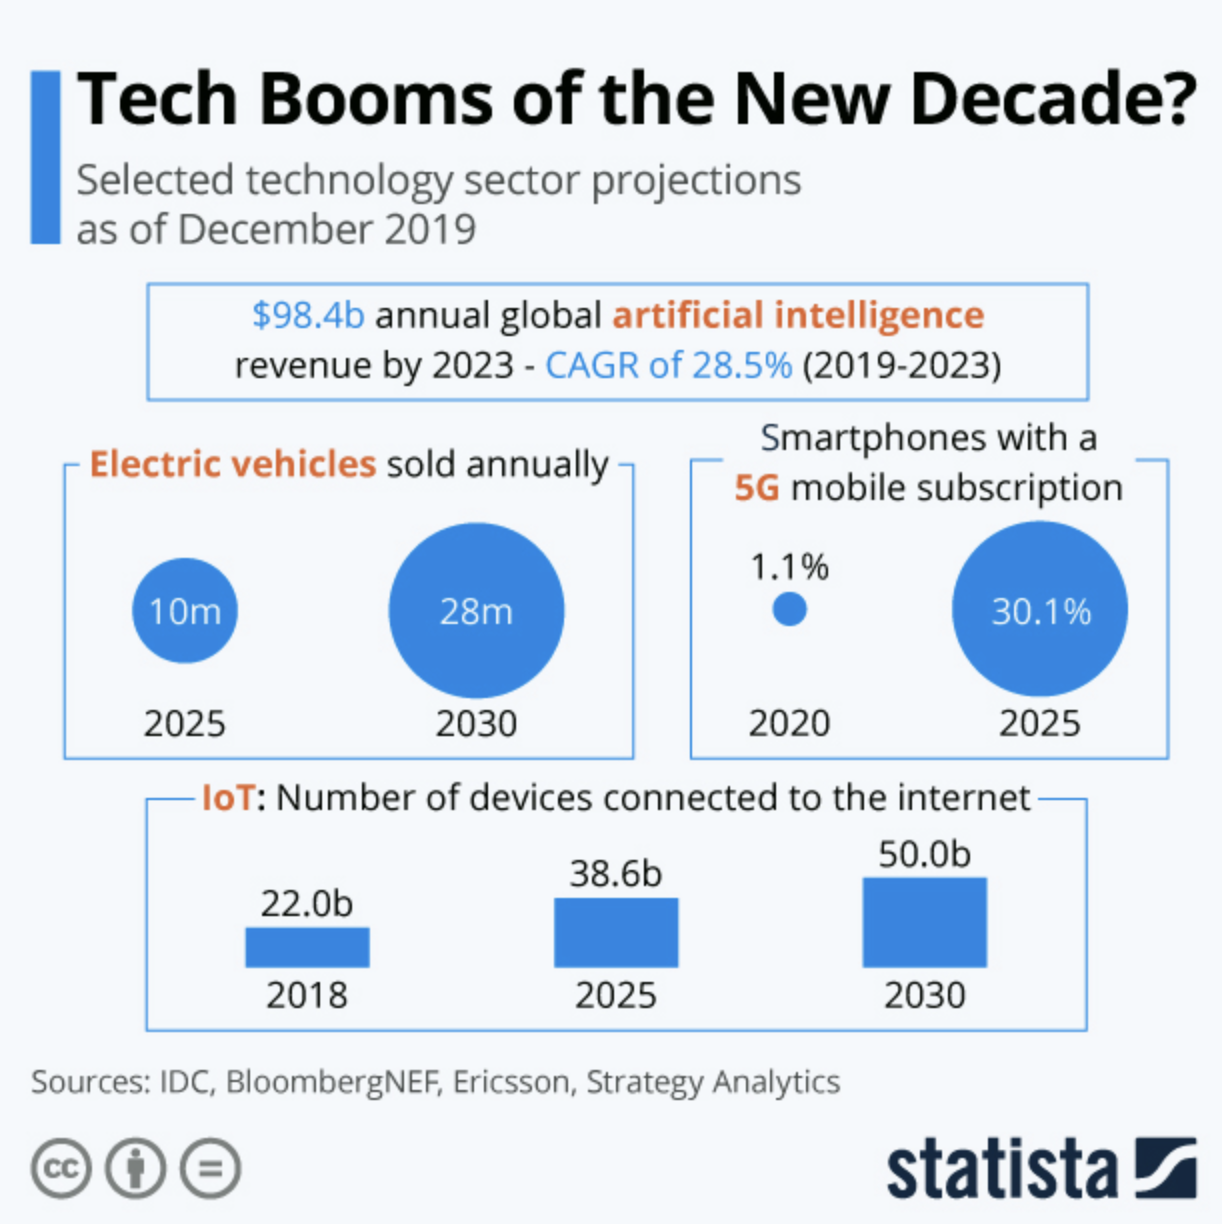 What are the Tech Booms of this new decade?